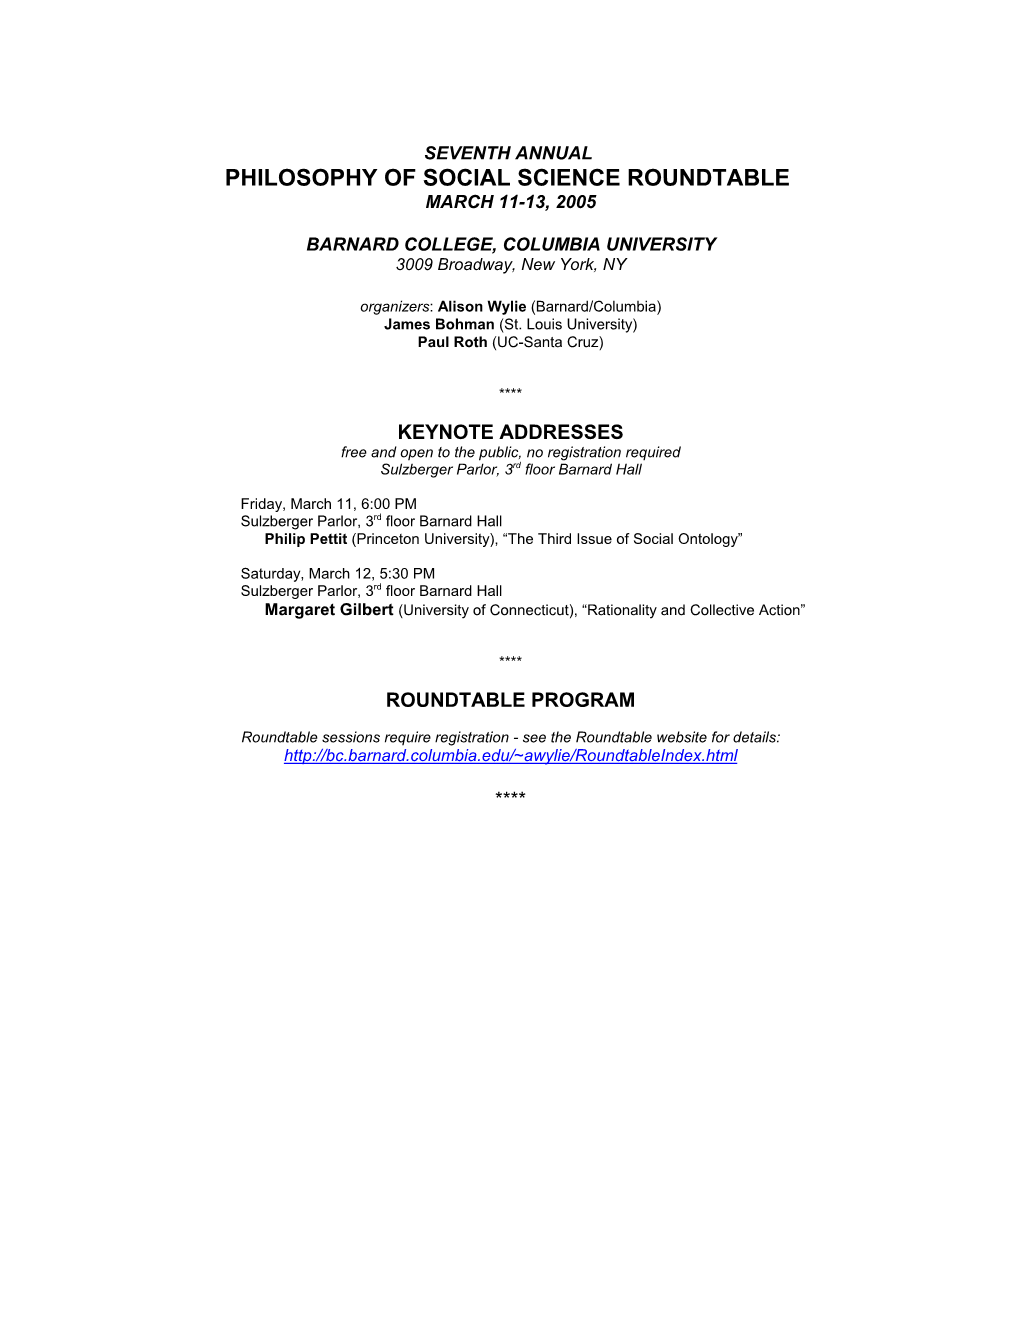 Philosophy of Social Science Roundtable March 11-13, 2005